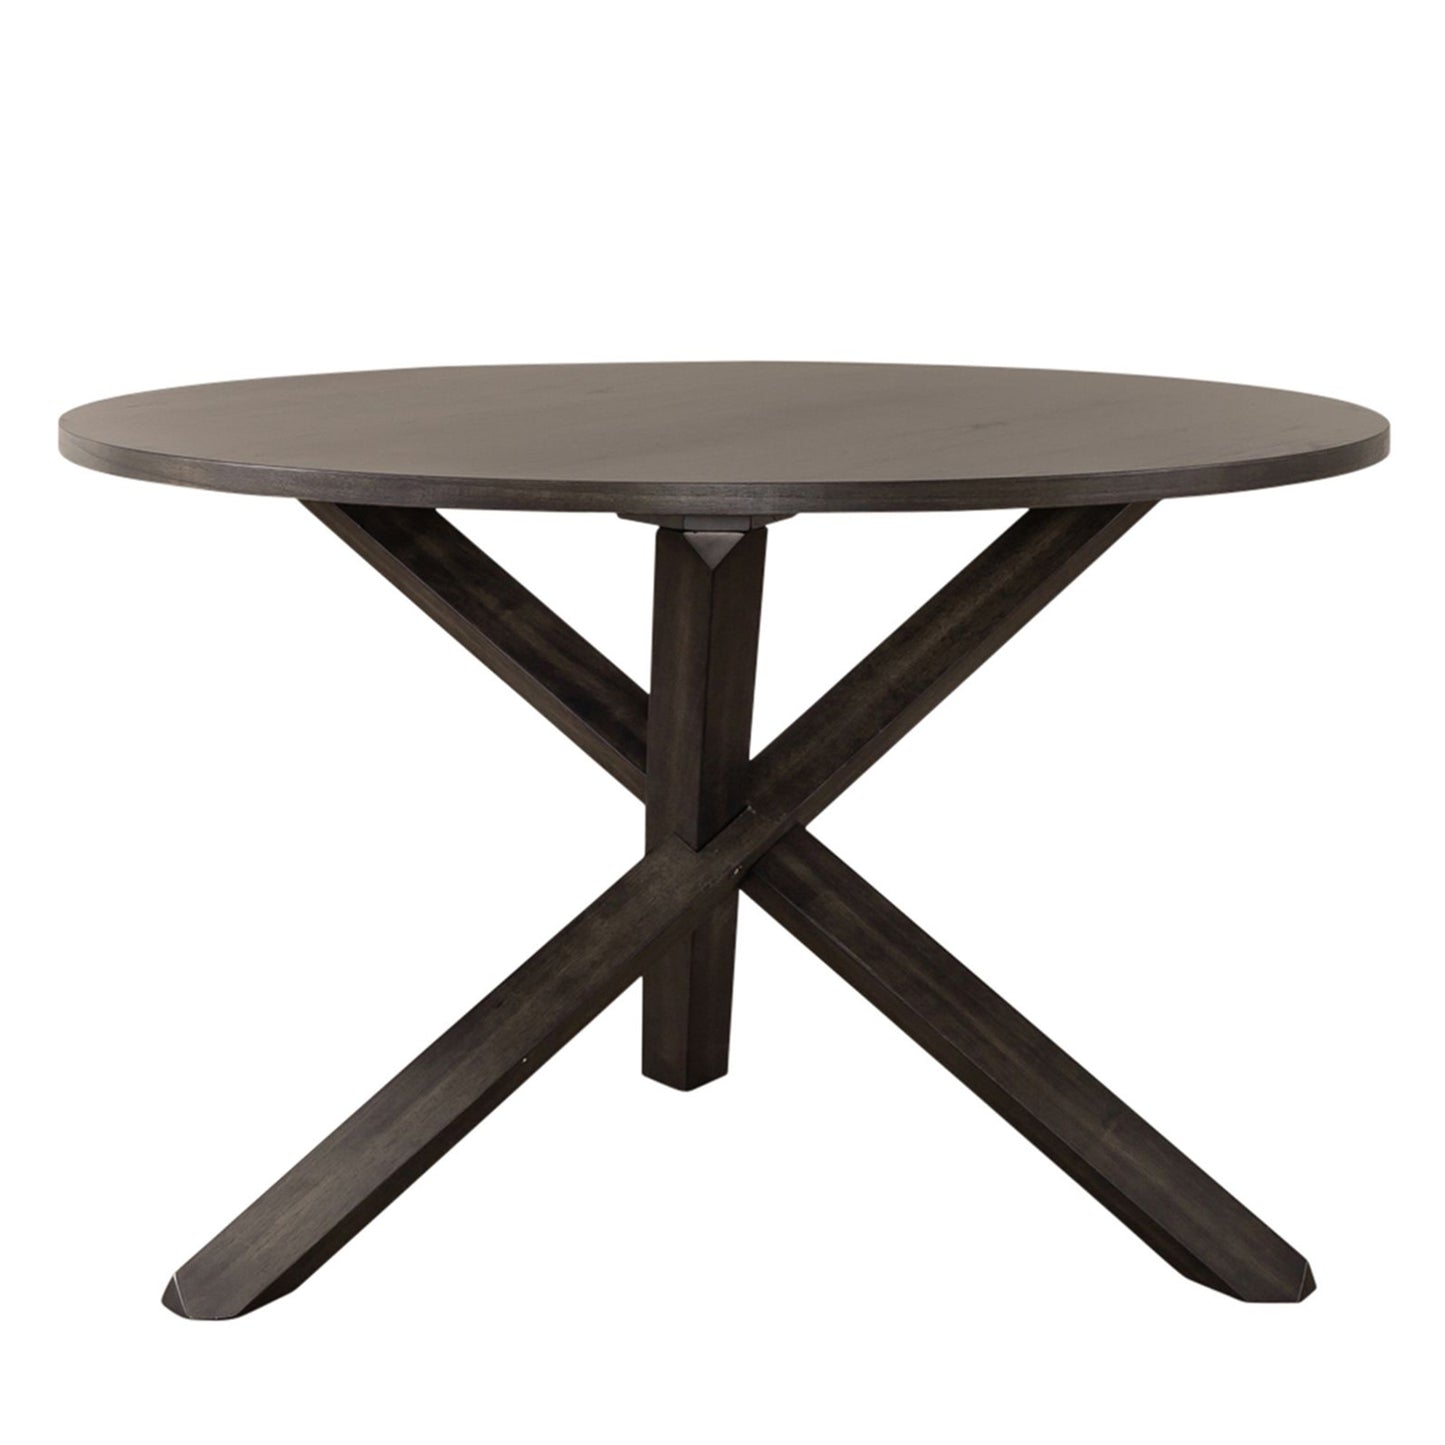 Almeta Dining Set - Crisscross X Base Round Table with 4 Chairs in Dark Umber Brown Finish